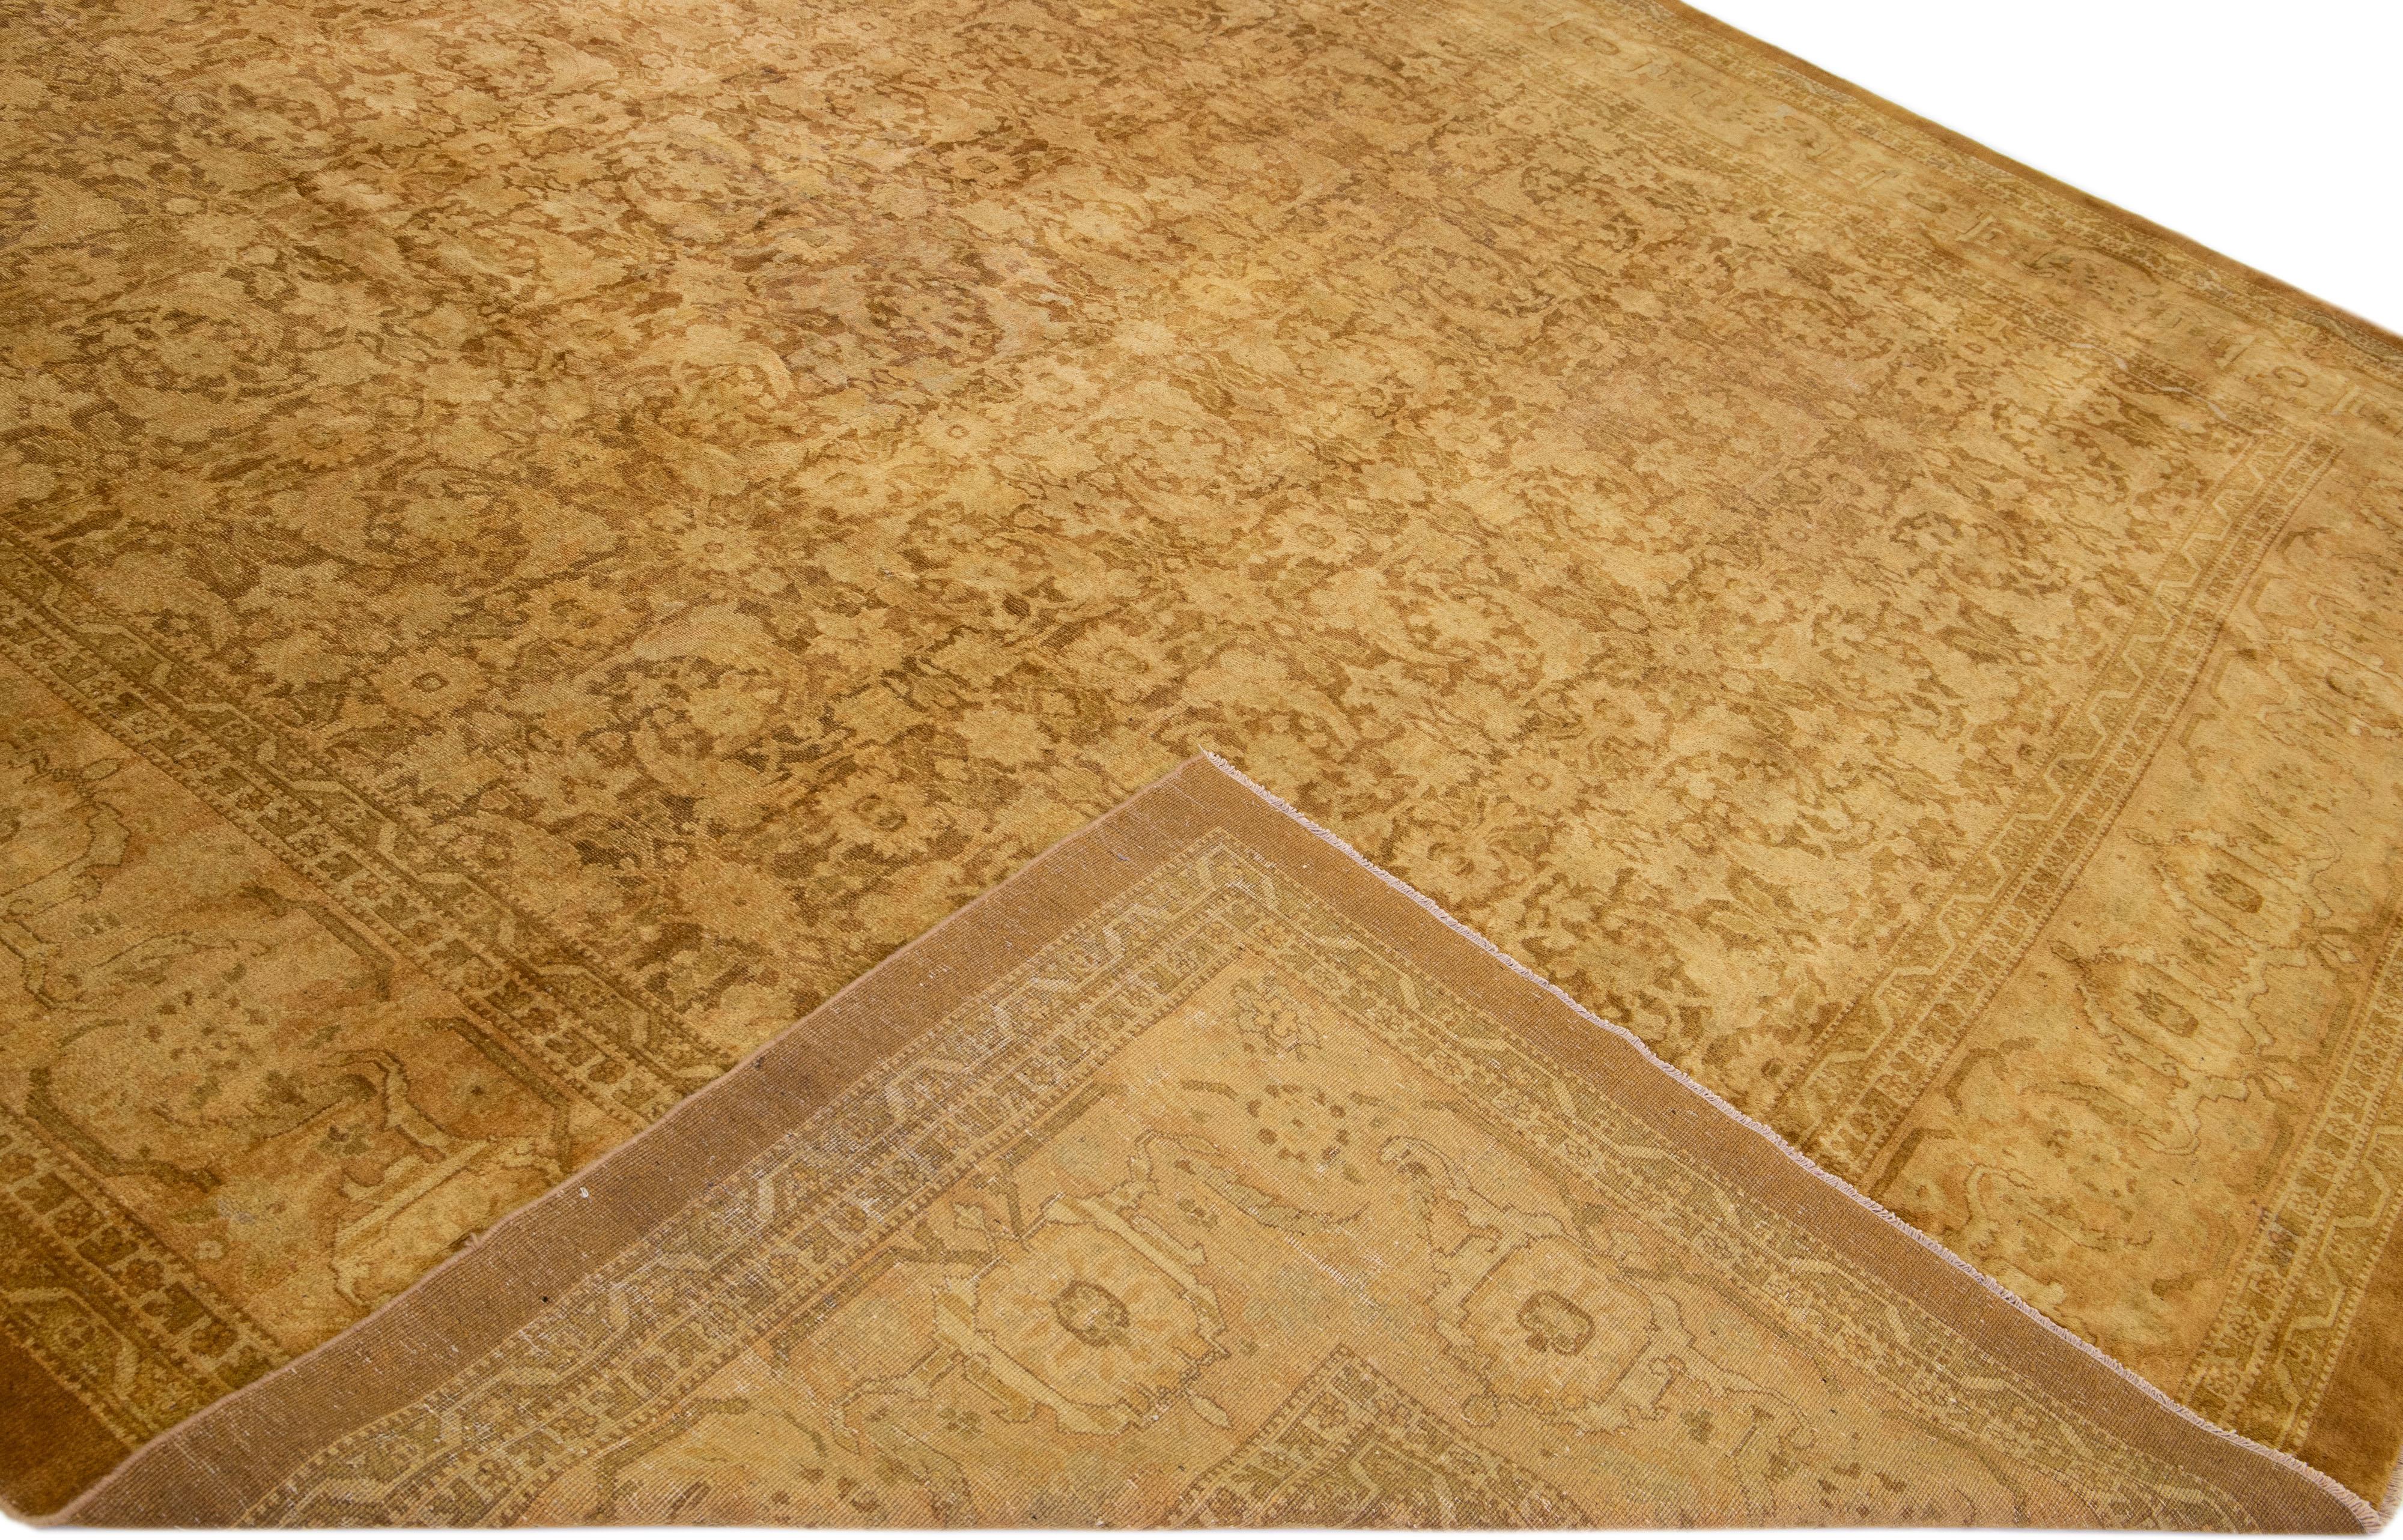 Beautiful antique Agra hand-knotted wool rug with a tan field. This Indian rug has brown accents in a gorgeous all-over floral pattern design.

This rug measures: 13' x 16'9''.